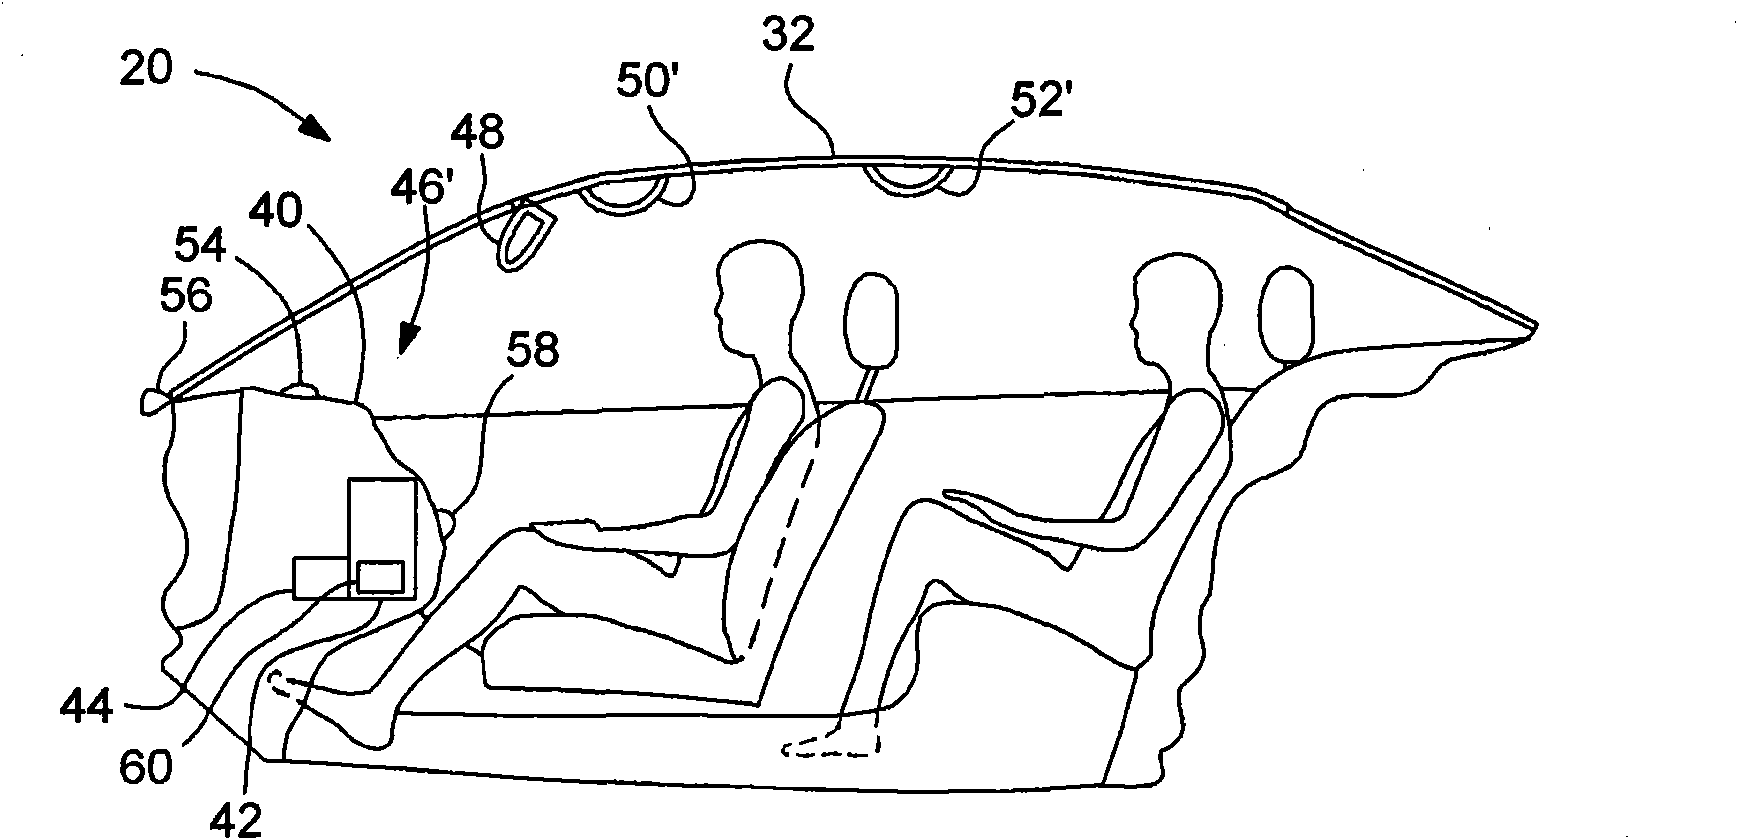 Automatic climate control for a vehicle